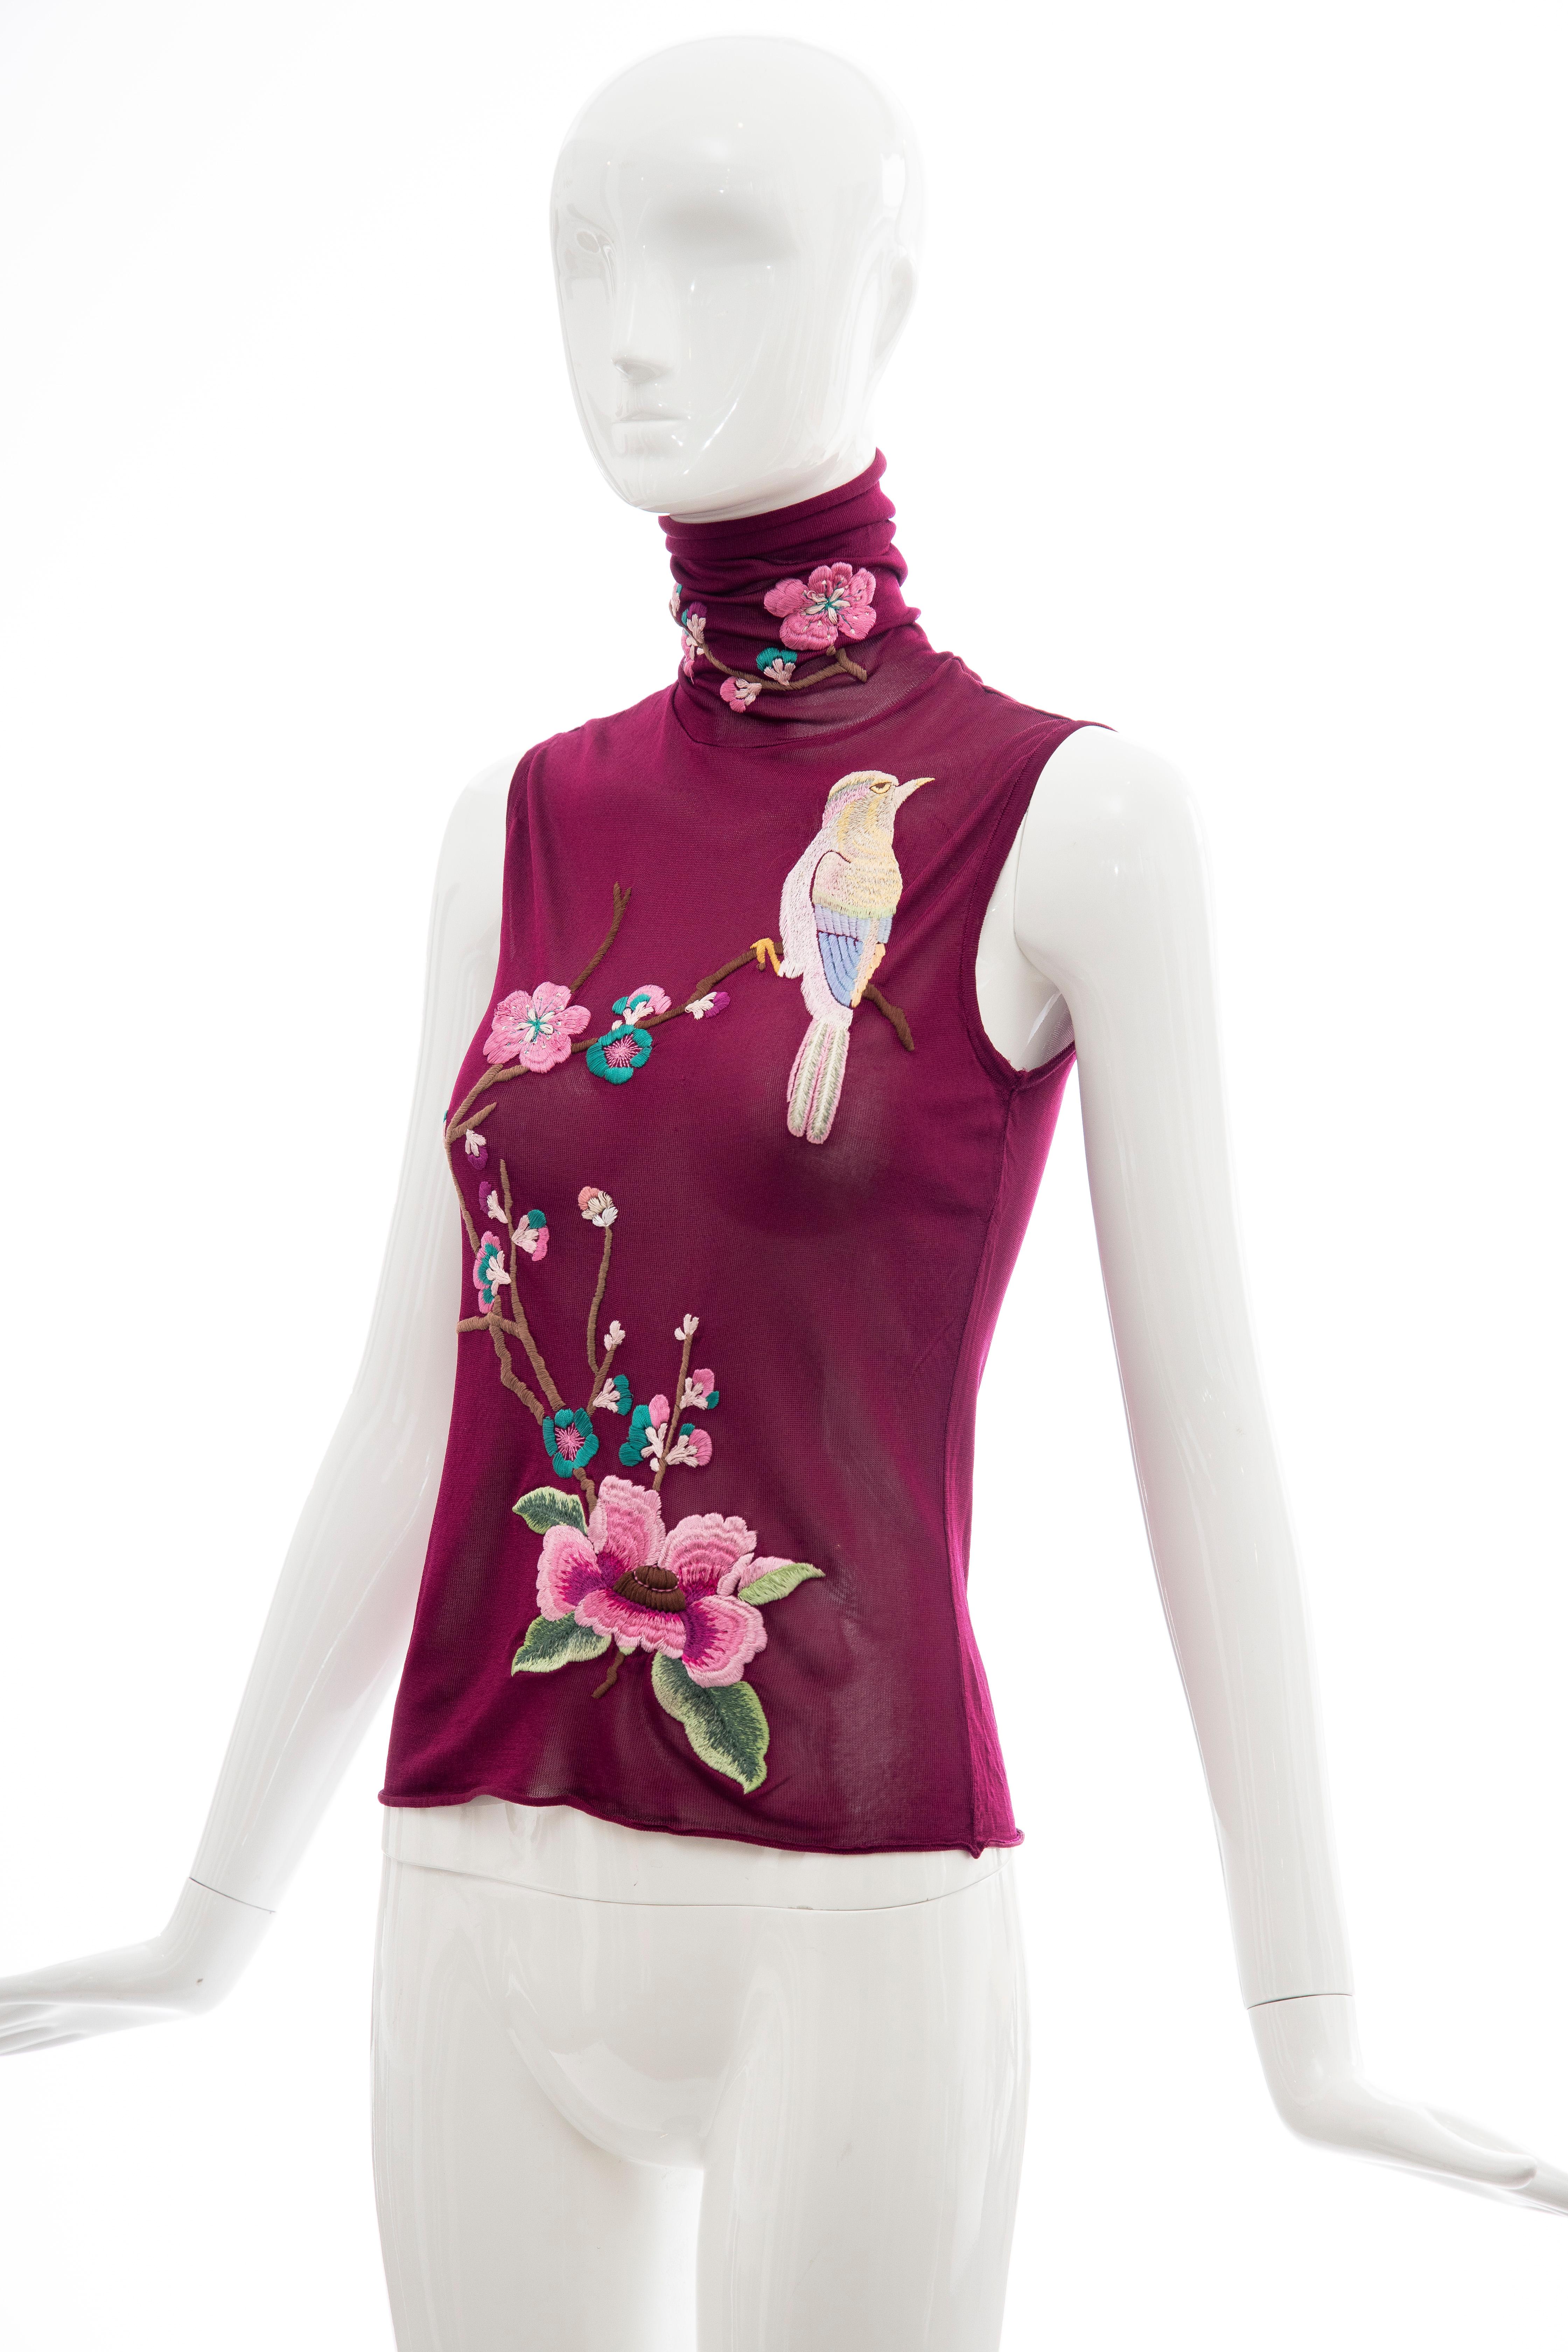 John Galliano for Christian Dior Embroidered Sleeveless Top, Fall 2003 4